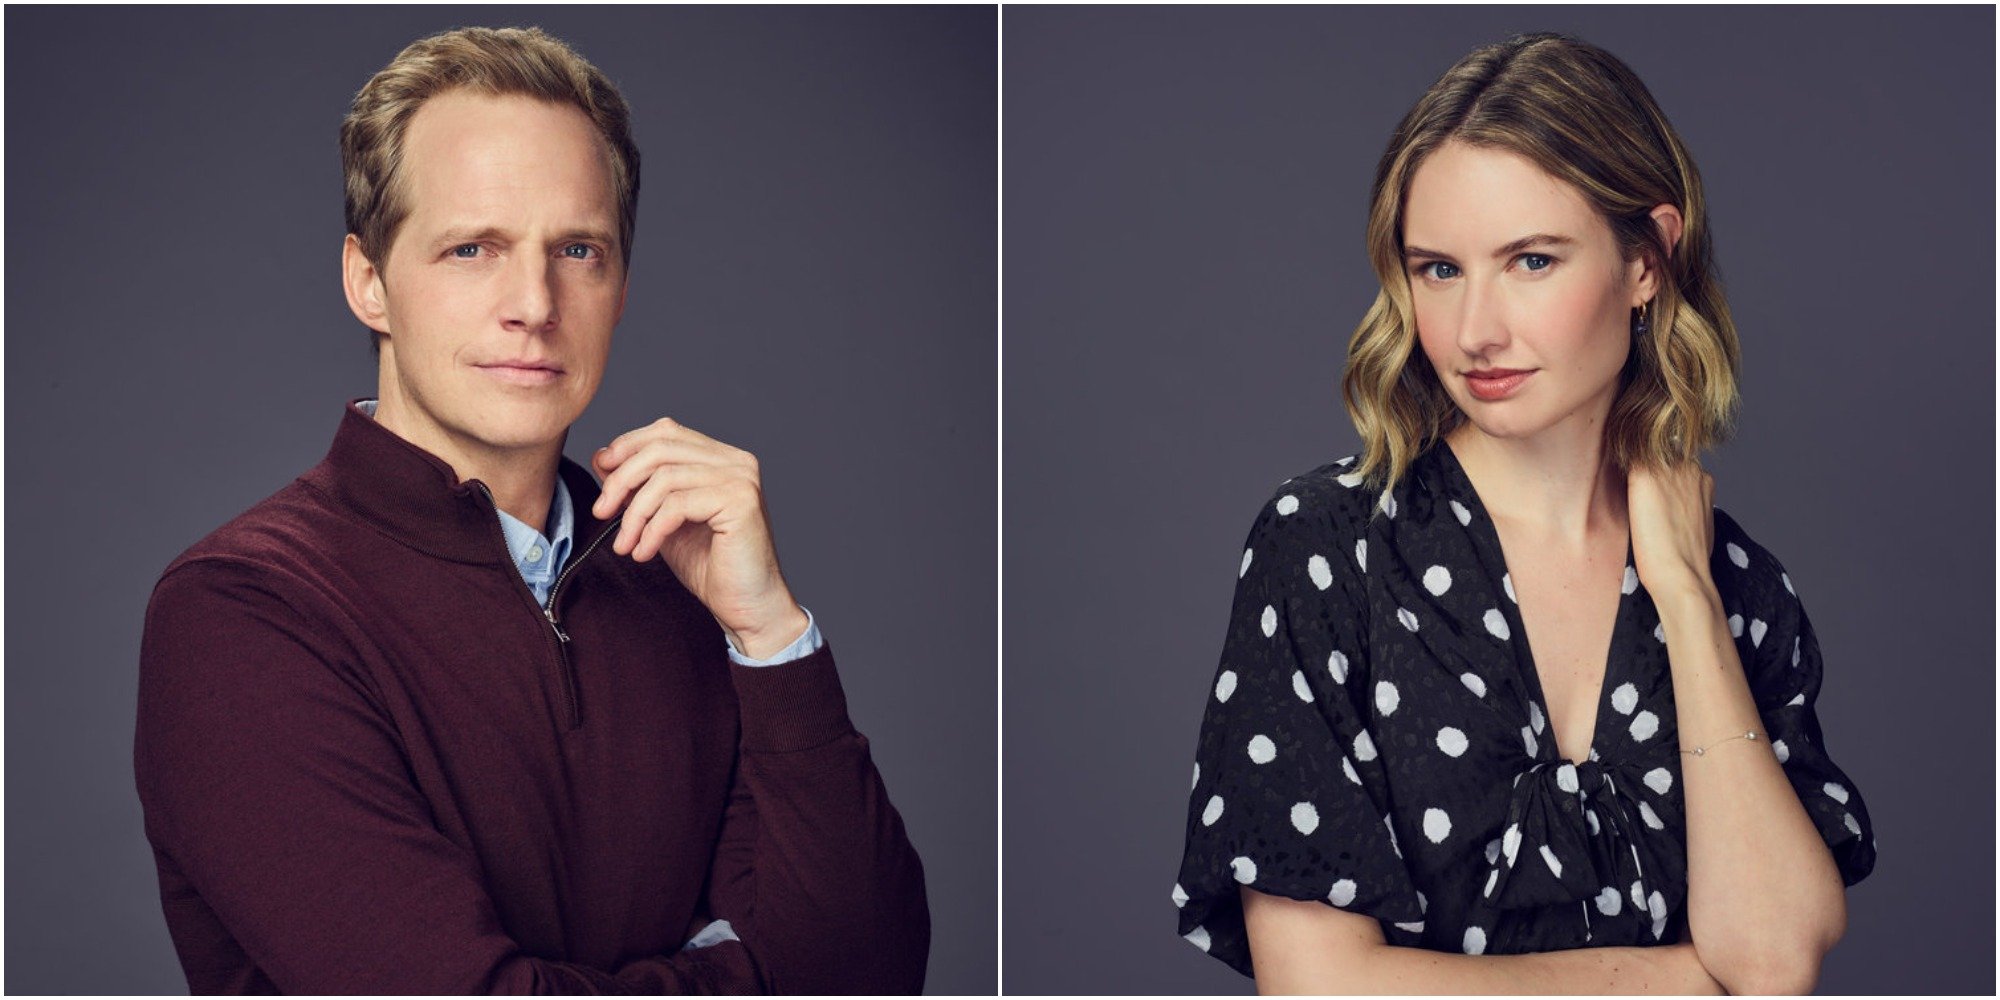 Chris Geere and Caitlin Thompson pose for This Is Us promo photos.